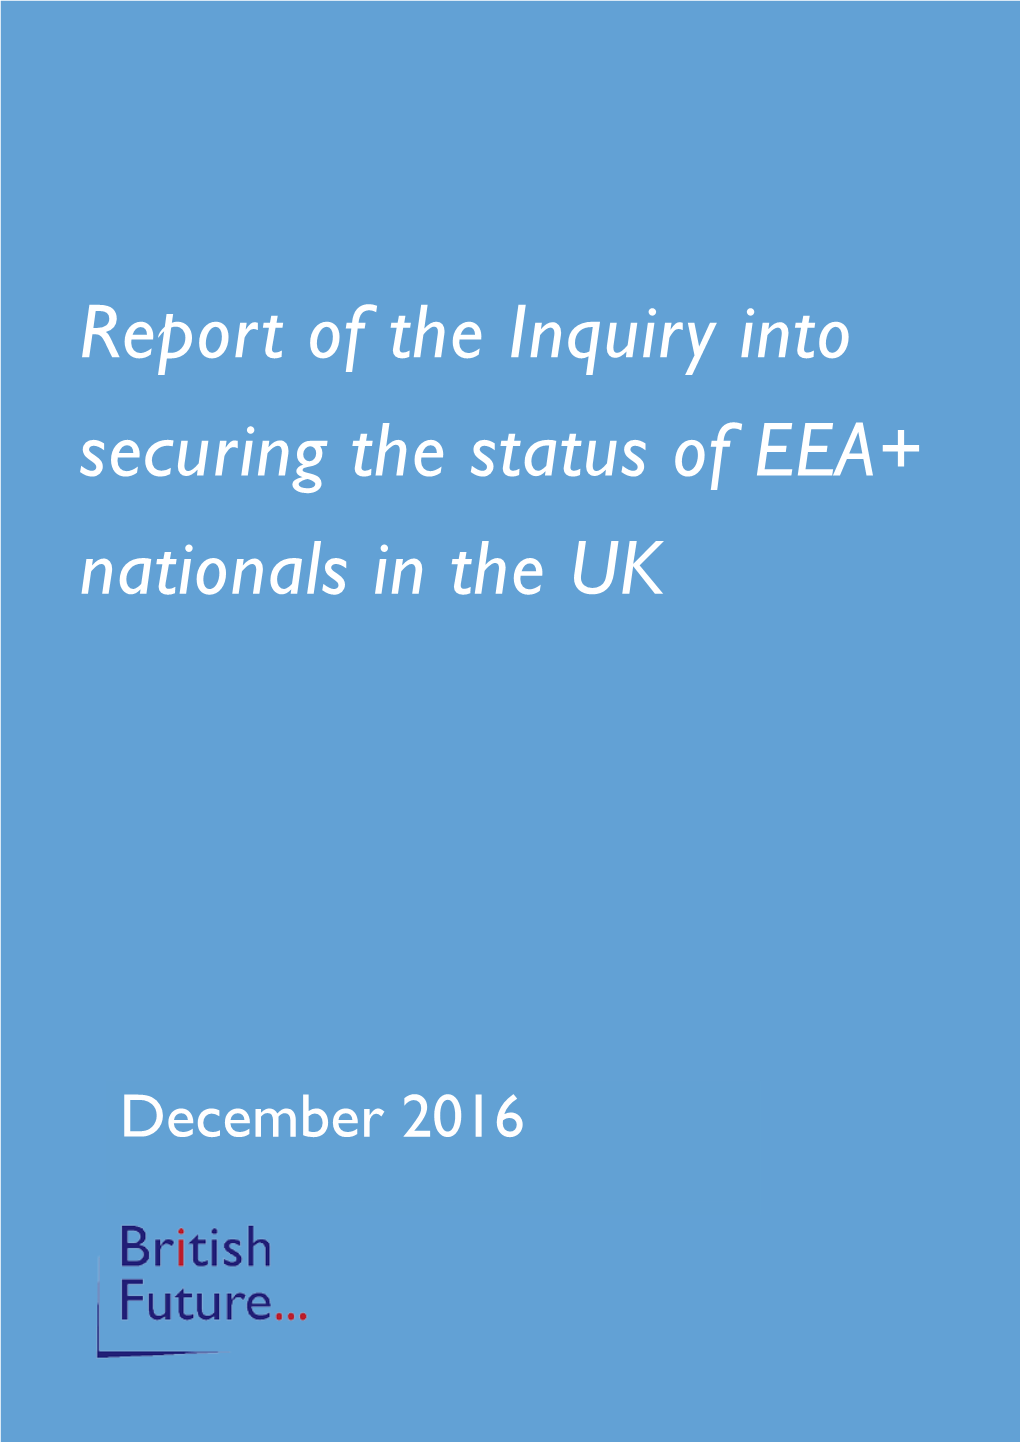 Report of the Inquiry Into Securing the Status of EEA+ Nationals in the UK